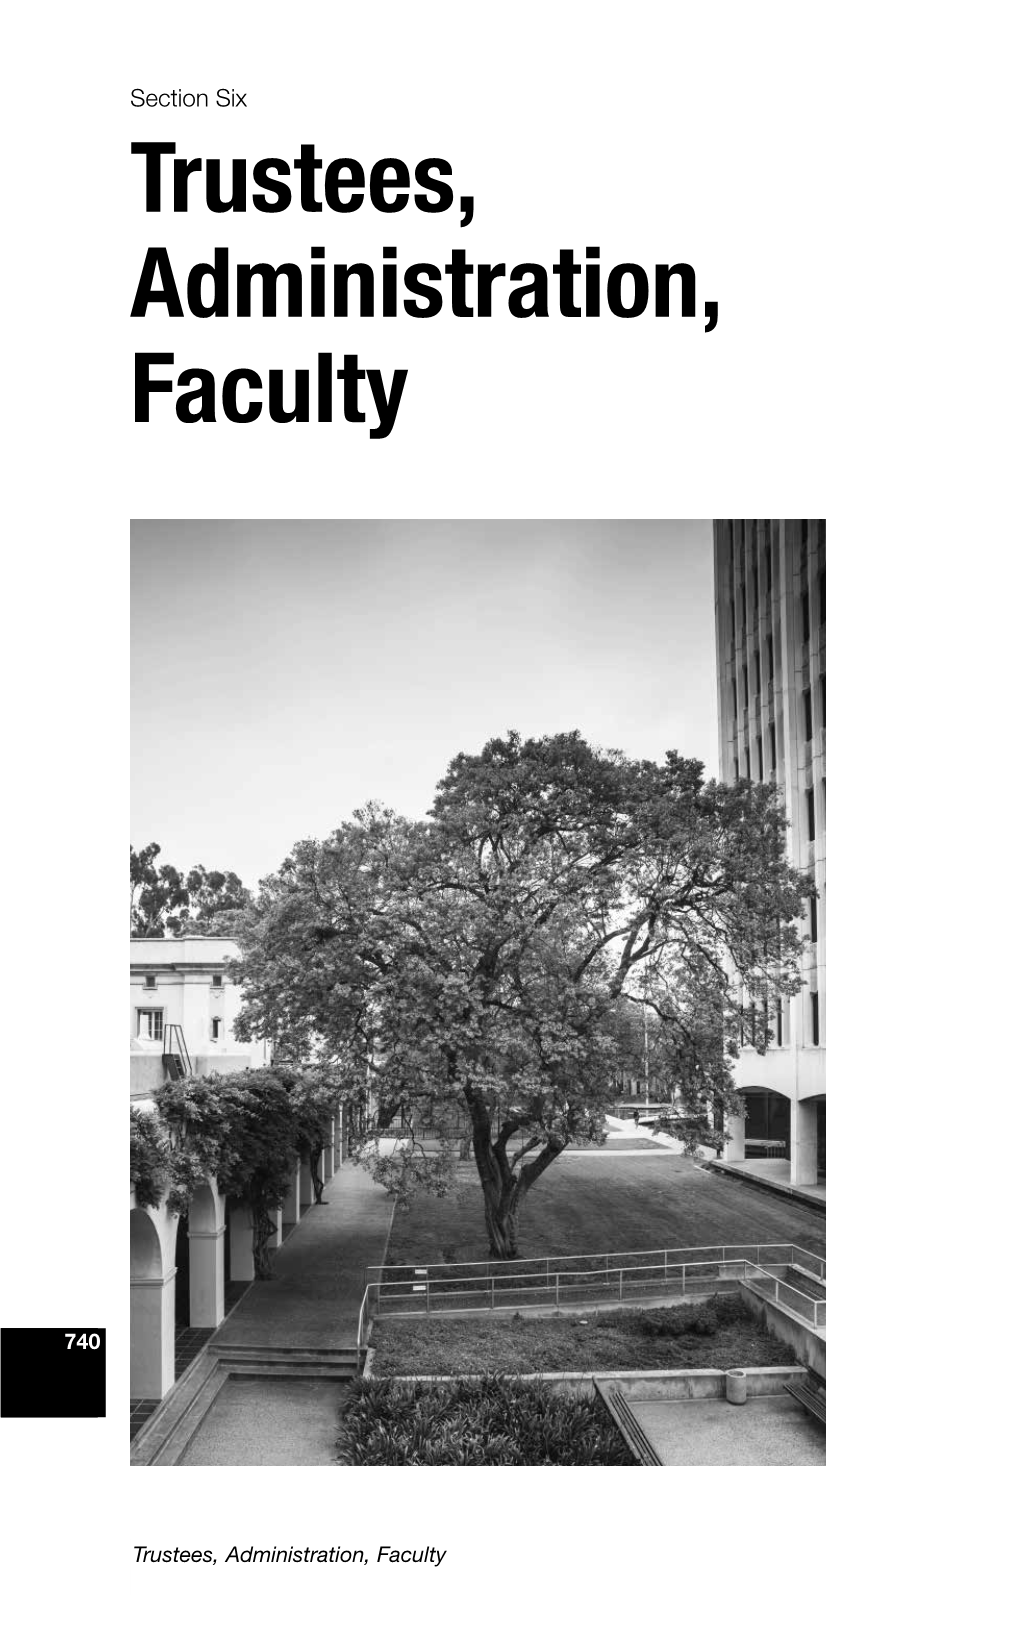 Section 6: Trustees, Administration, Faculty